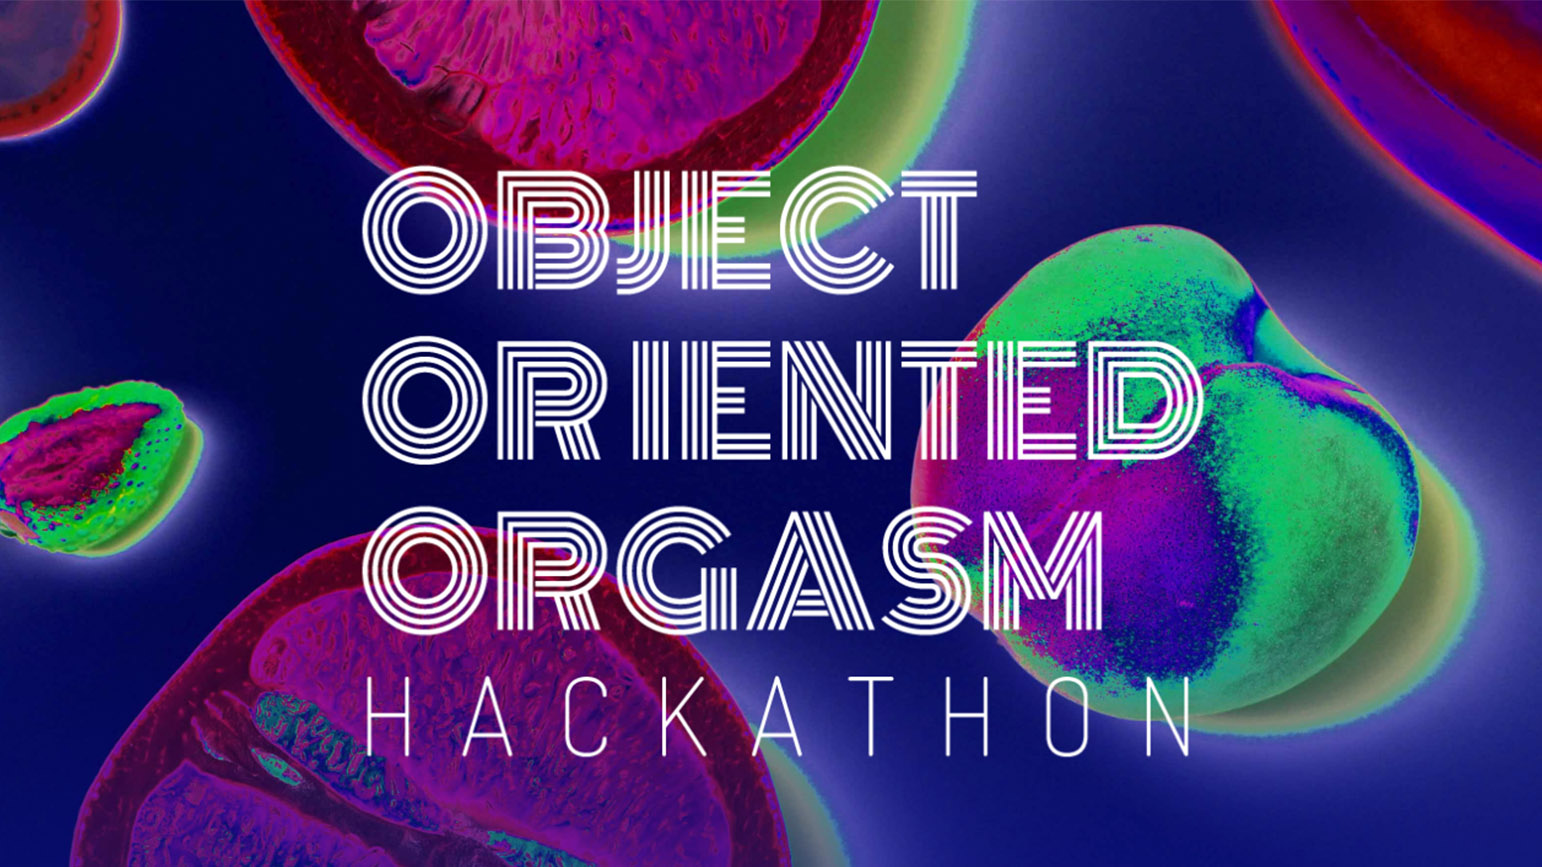 Abstract graphic with the words "Object Oriented Orgasm Hackathon"